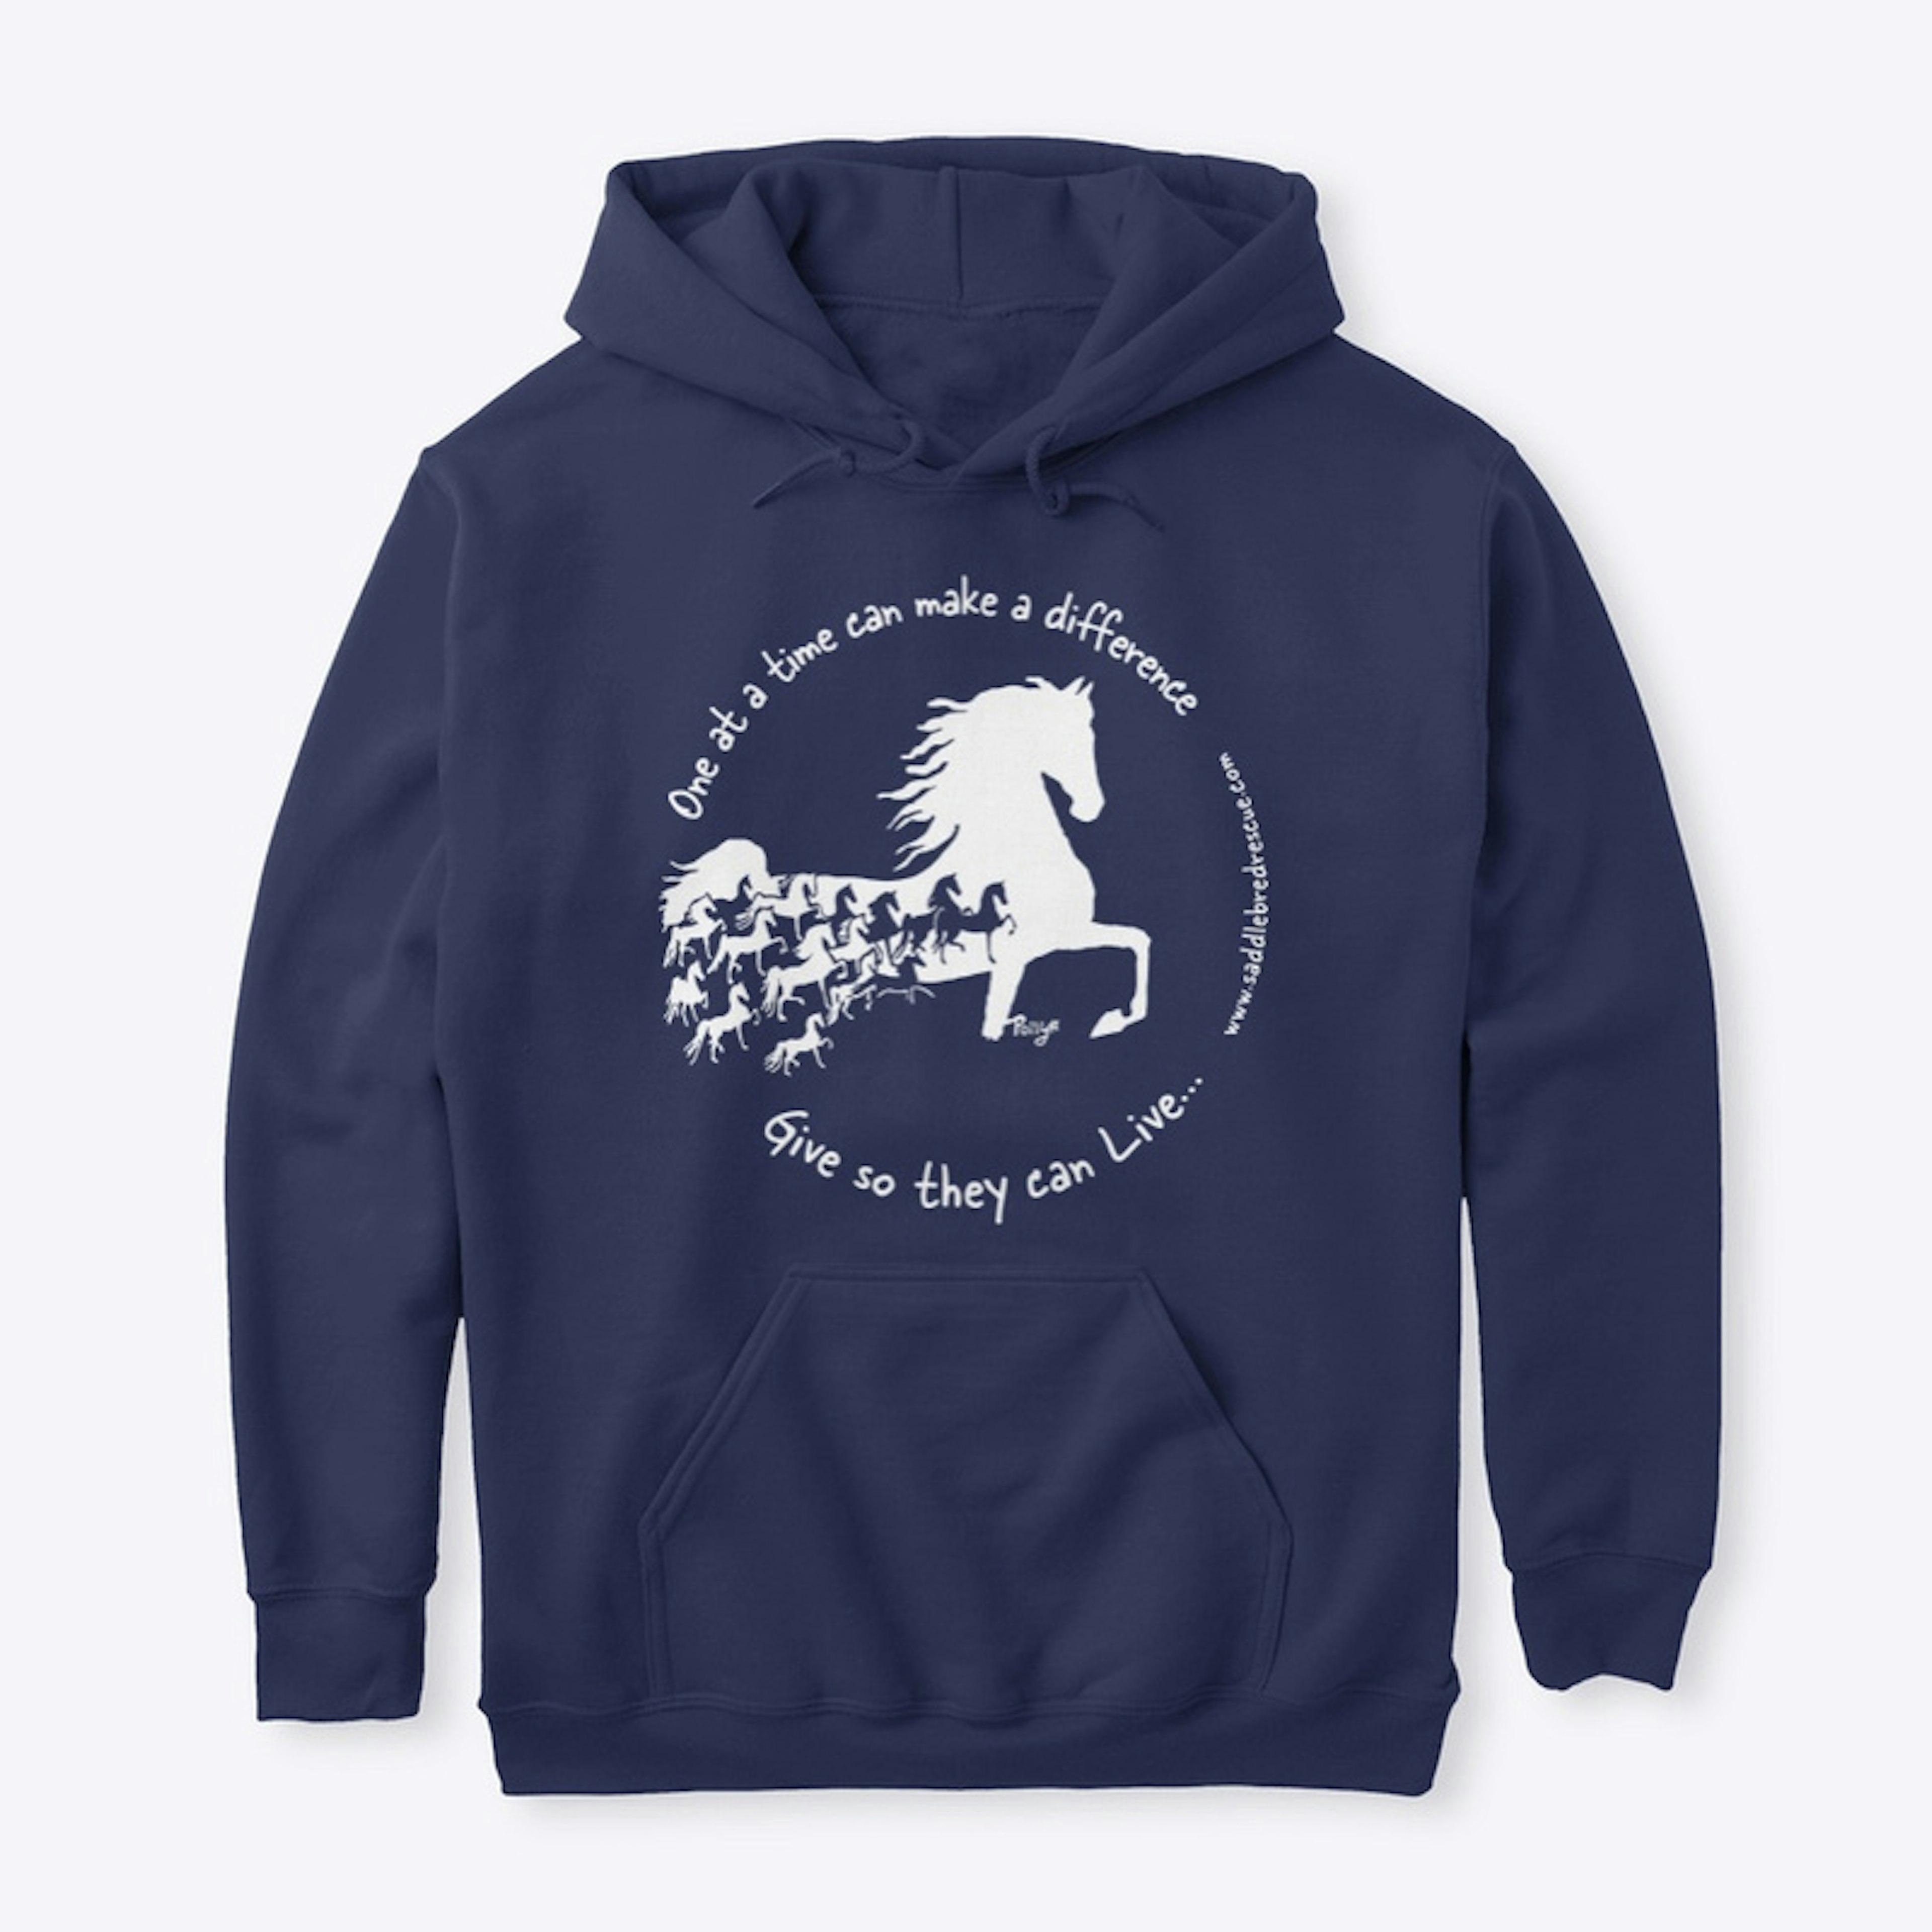 Give so they can live hoodie